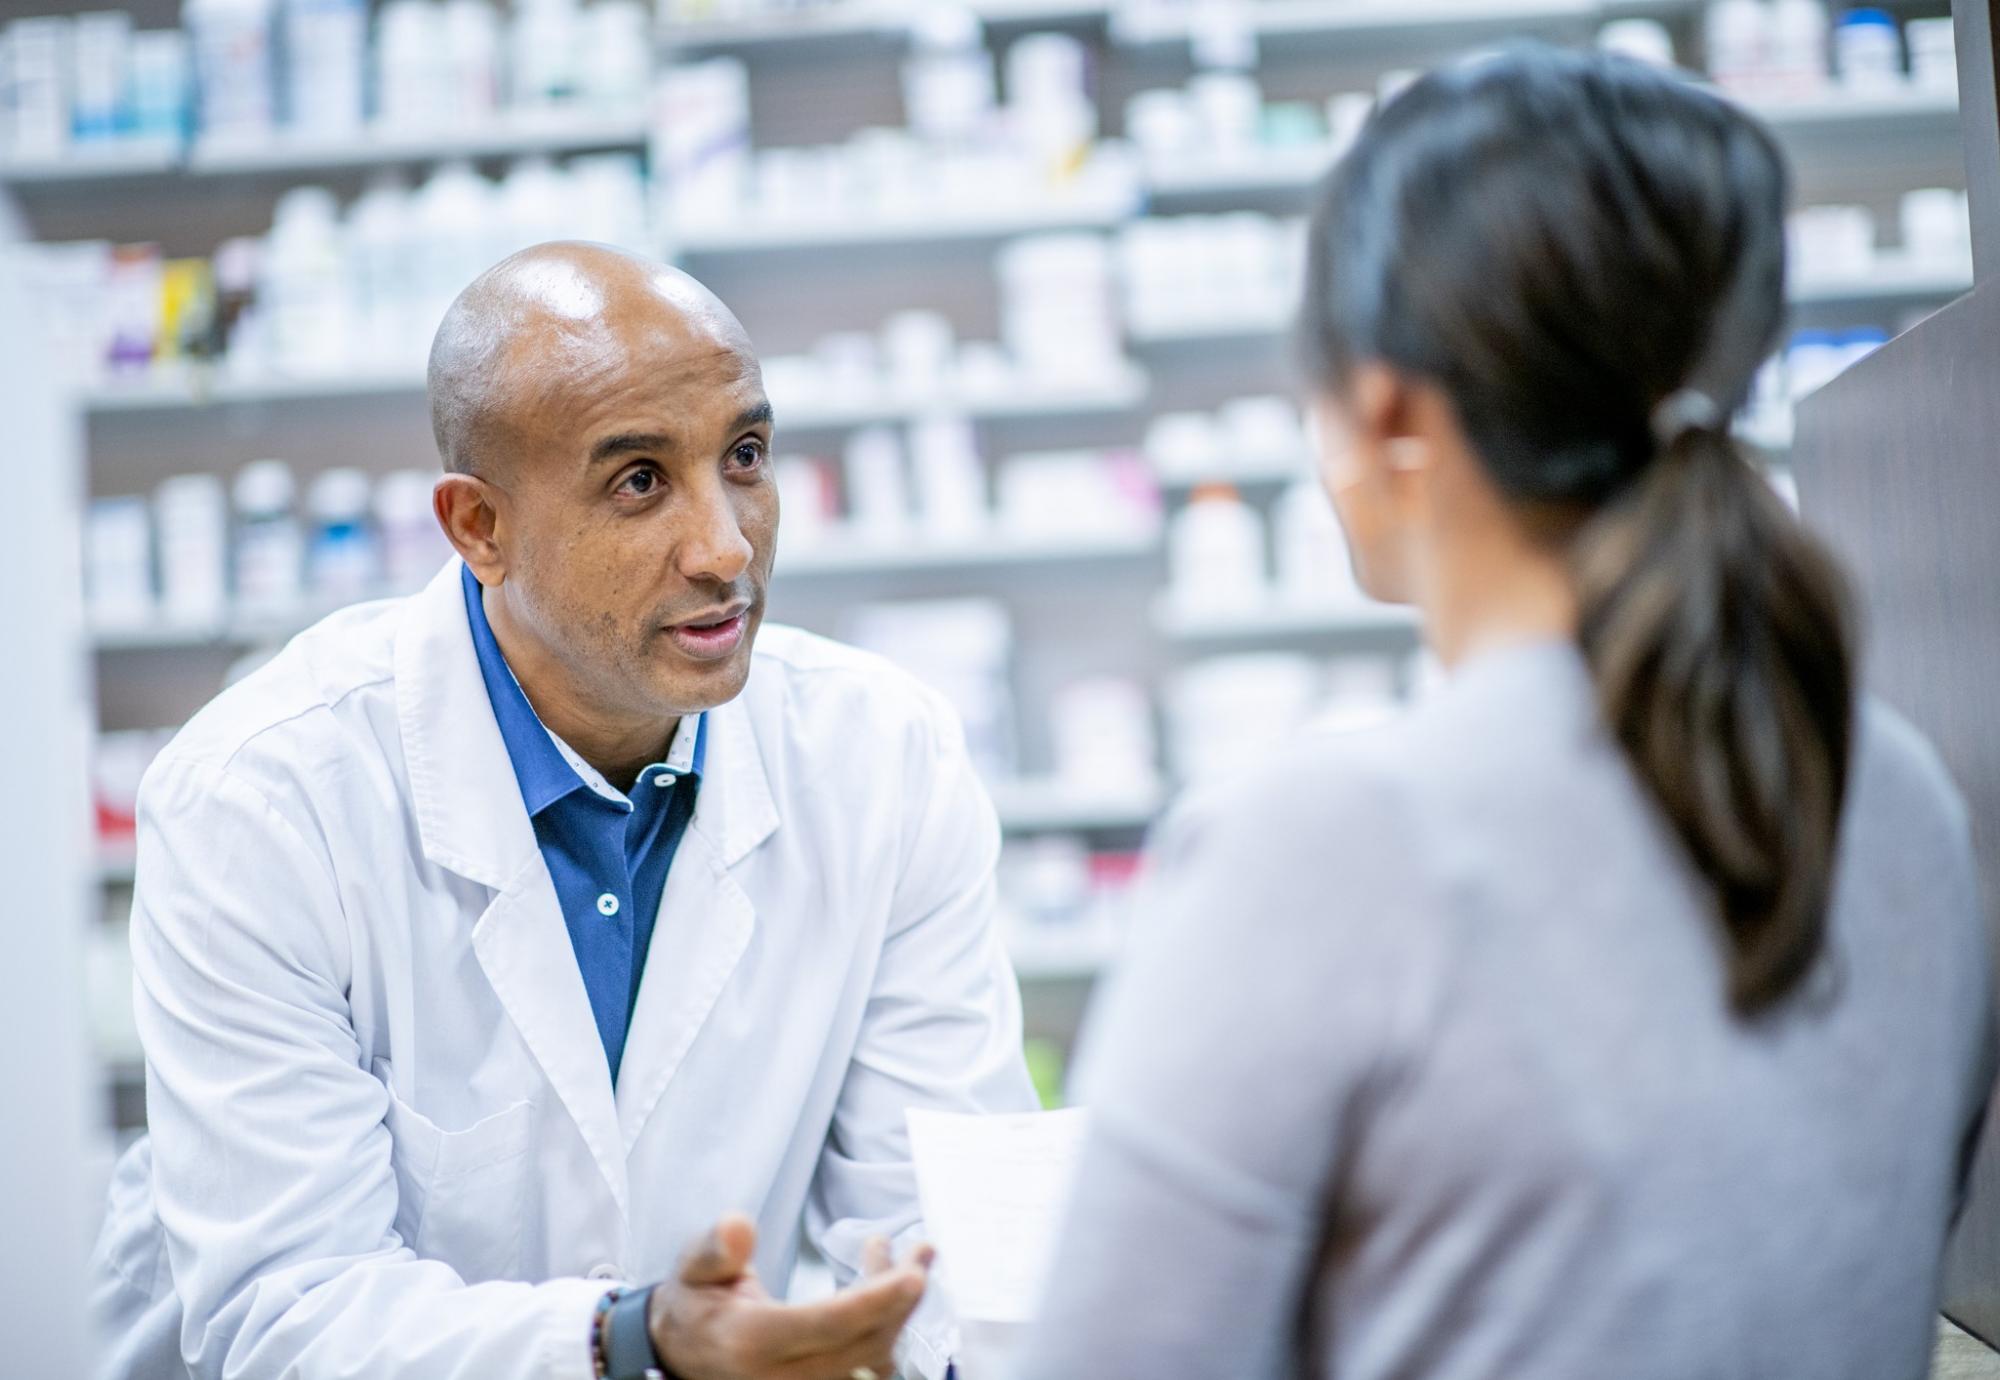 Pharmacist discussing with a customer